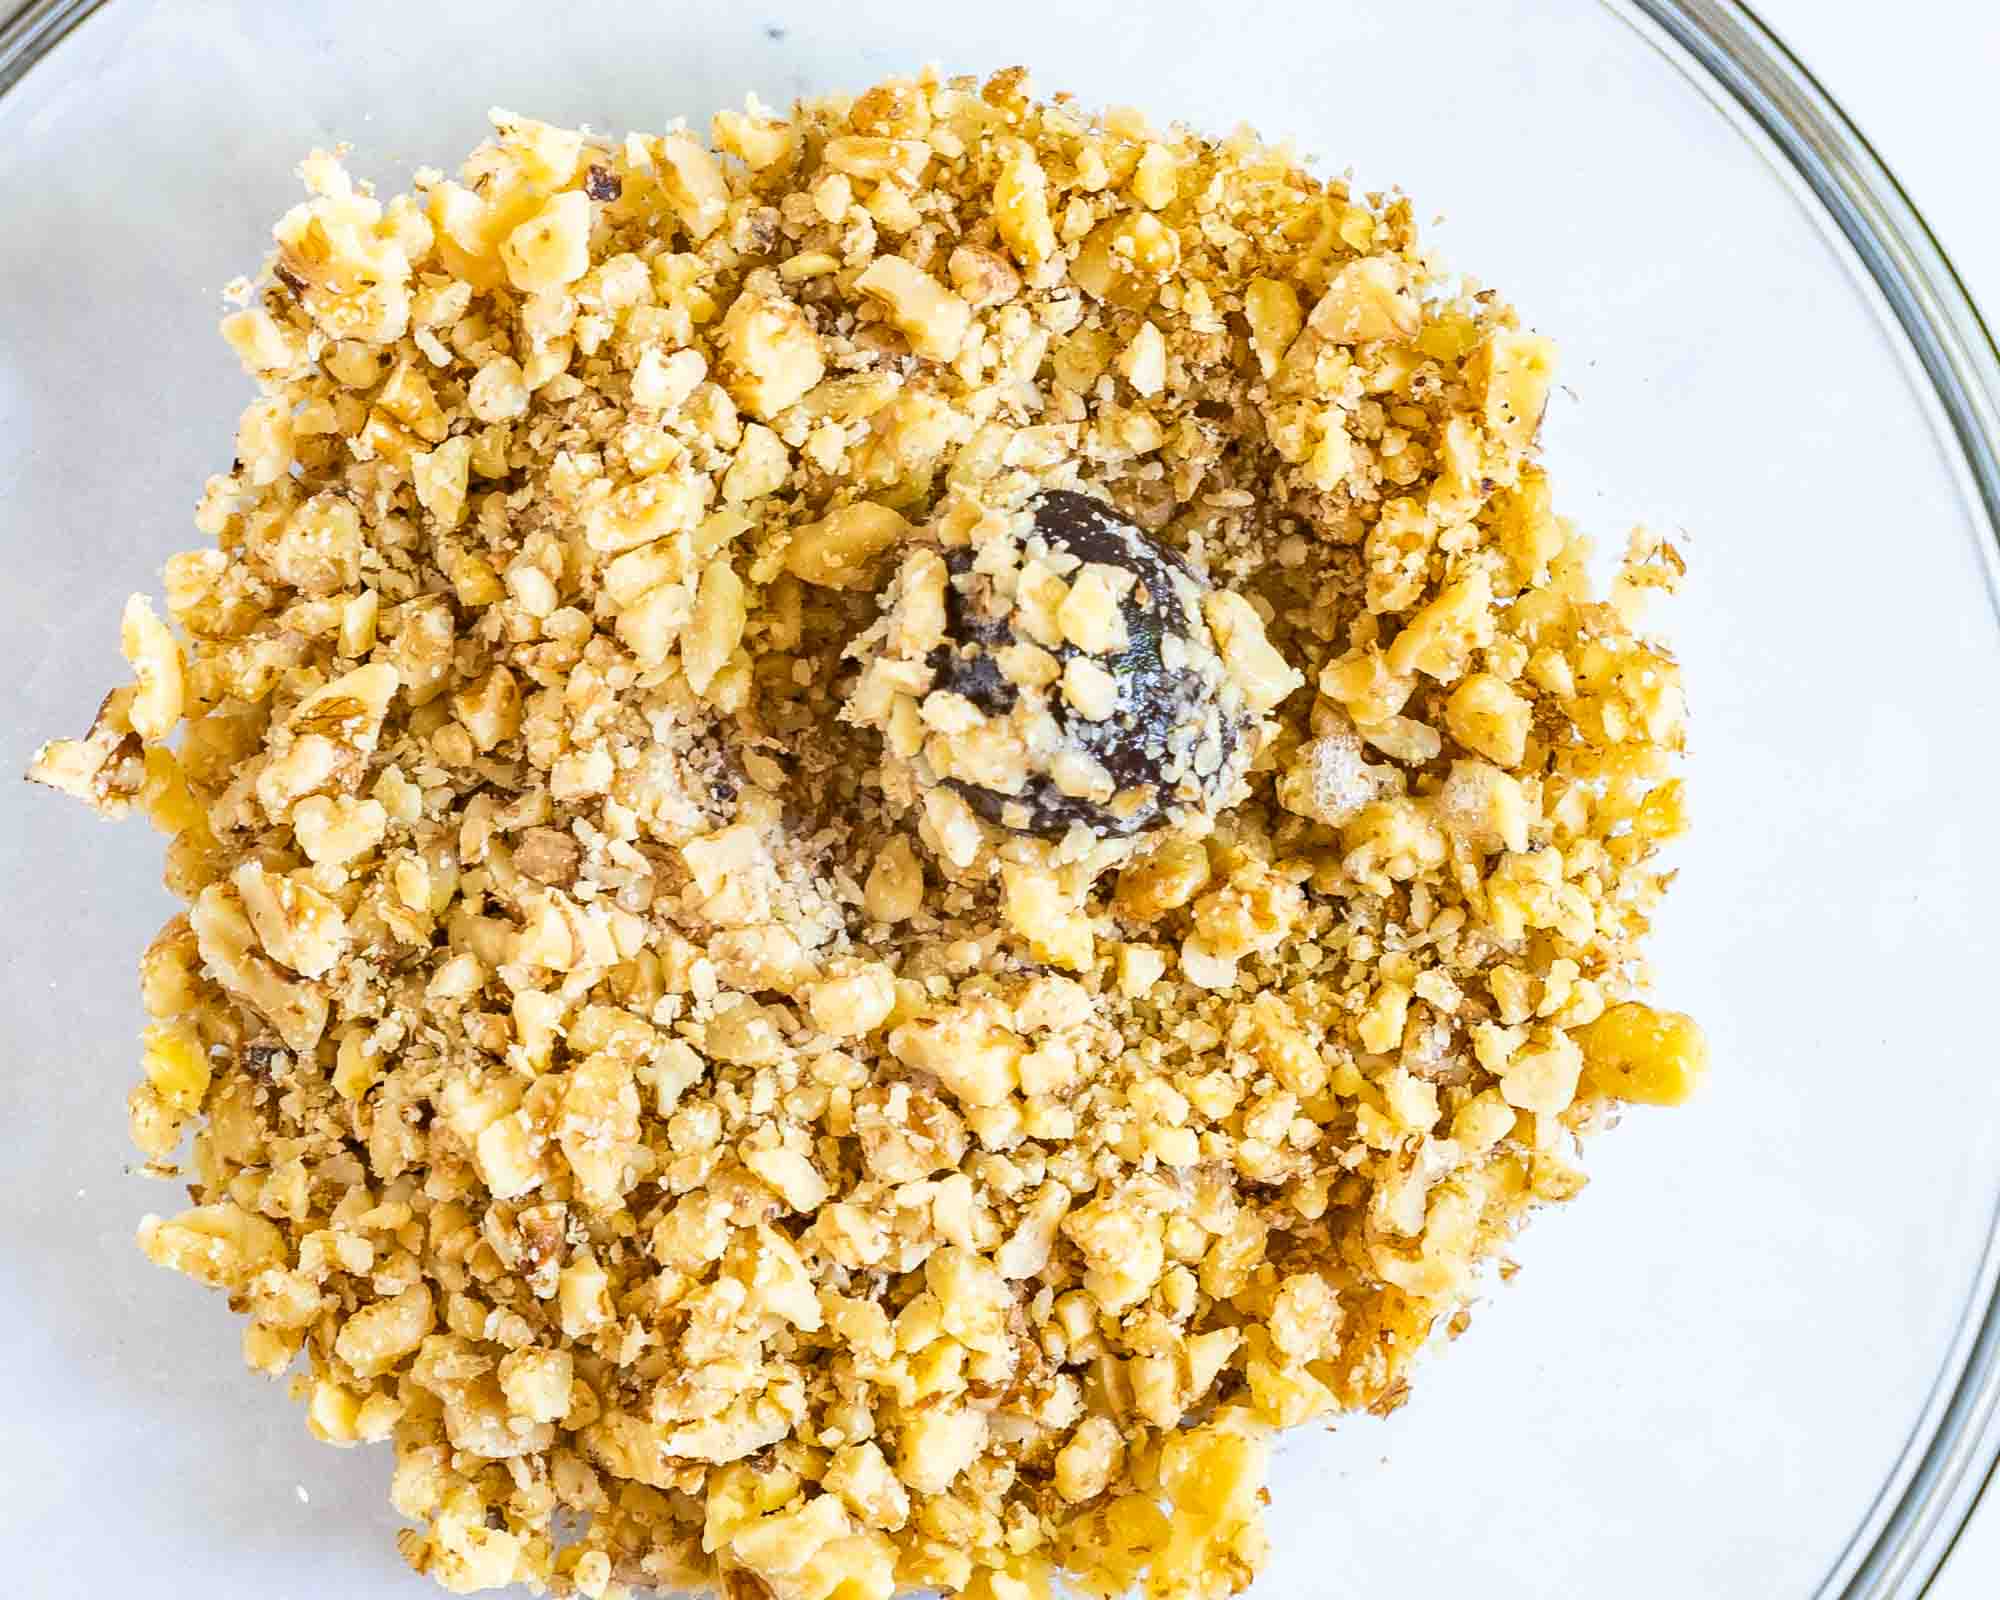 Ball of Chocolate thumbprint cookie dough rolled in crushed nuts.